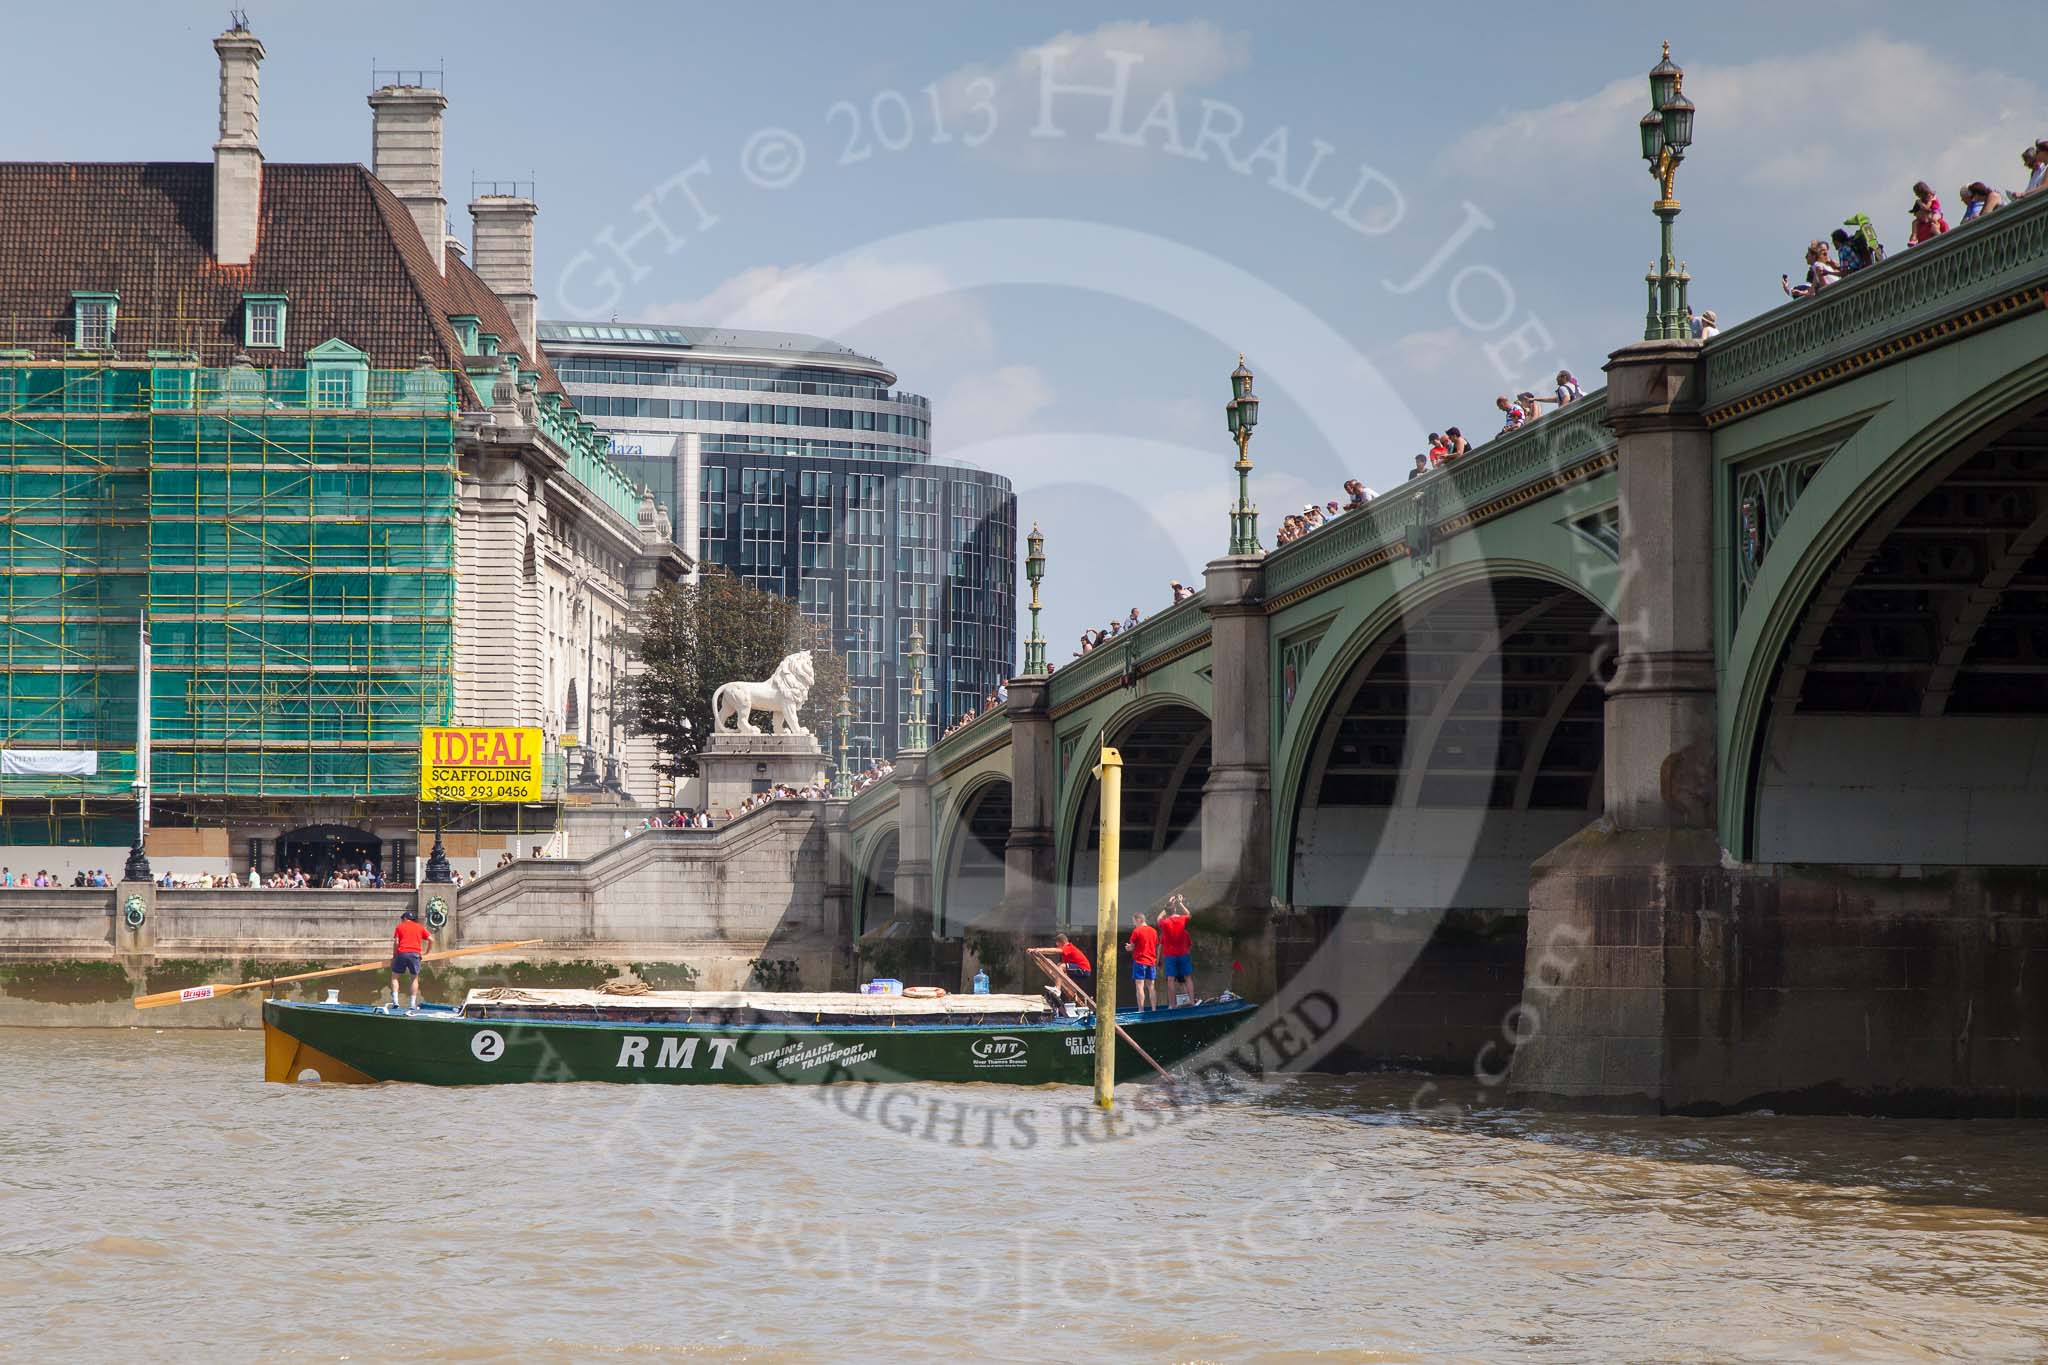 TOW River Thames Barge Driving Race 2013: Barge "Jane", by the RMT Union, crossing the finish line of the race at Westminster Bridge..
River Thames between Greenwich and Westminster,
London,

United Kingdom,
on 13 July 2013 at 14:30, image #475